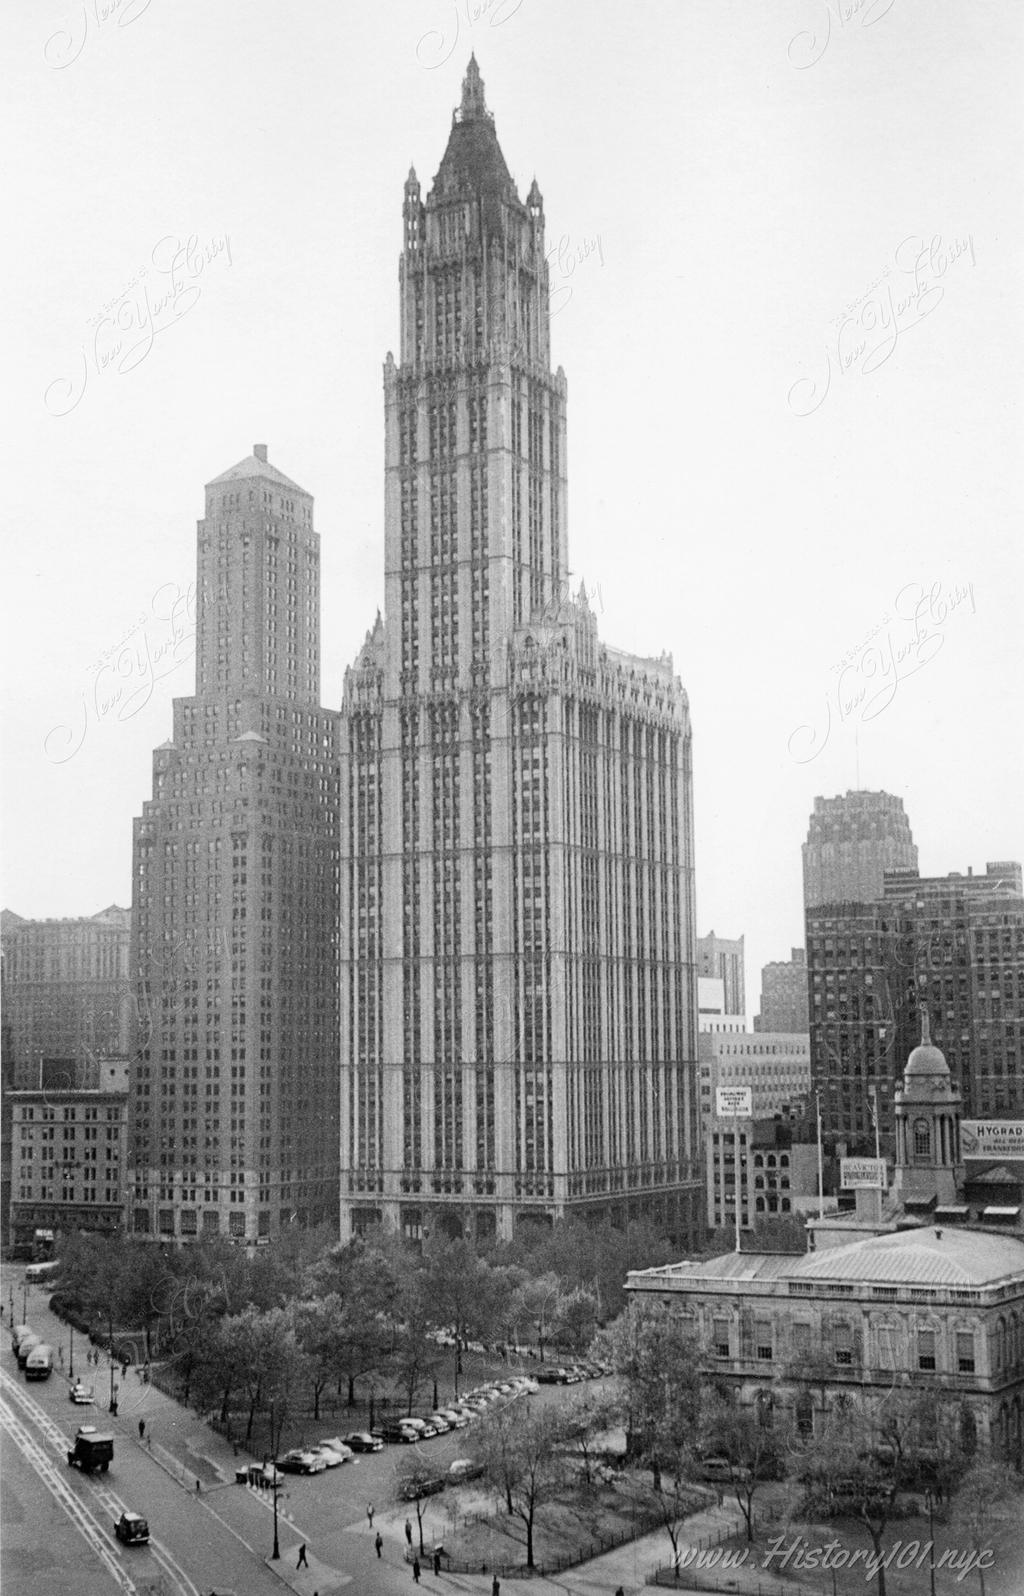 Photograph shows the Woolworth building from across Broadway Street.